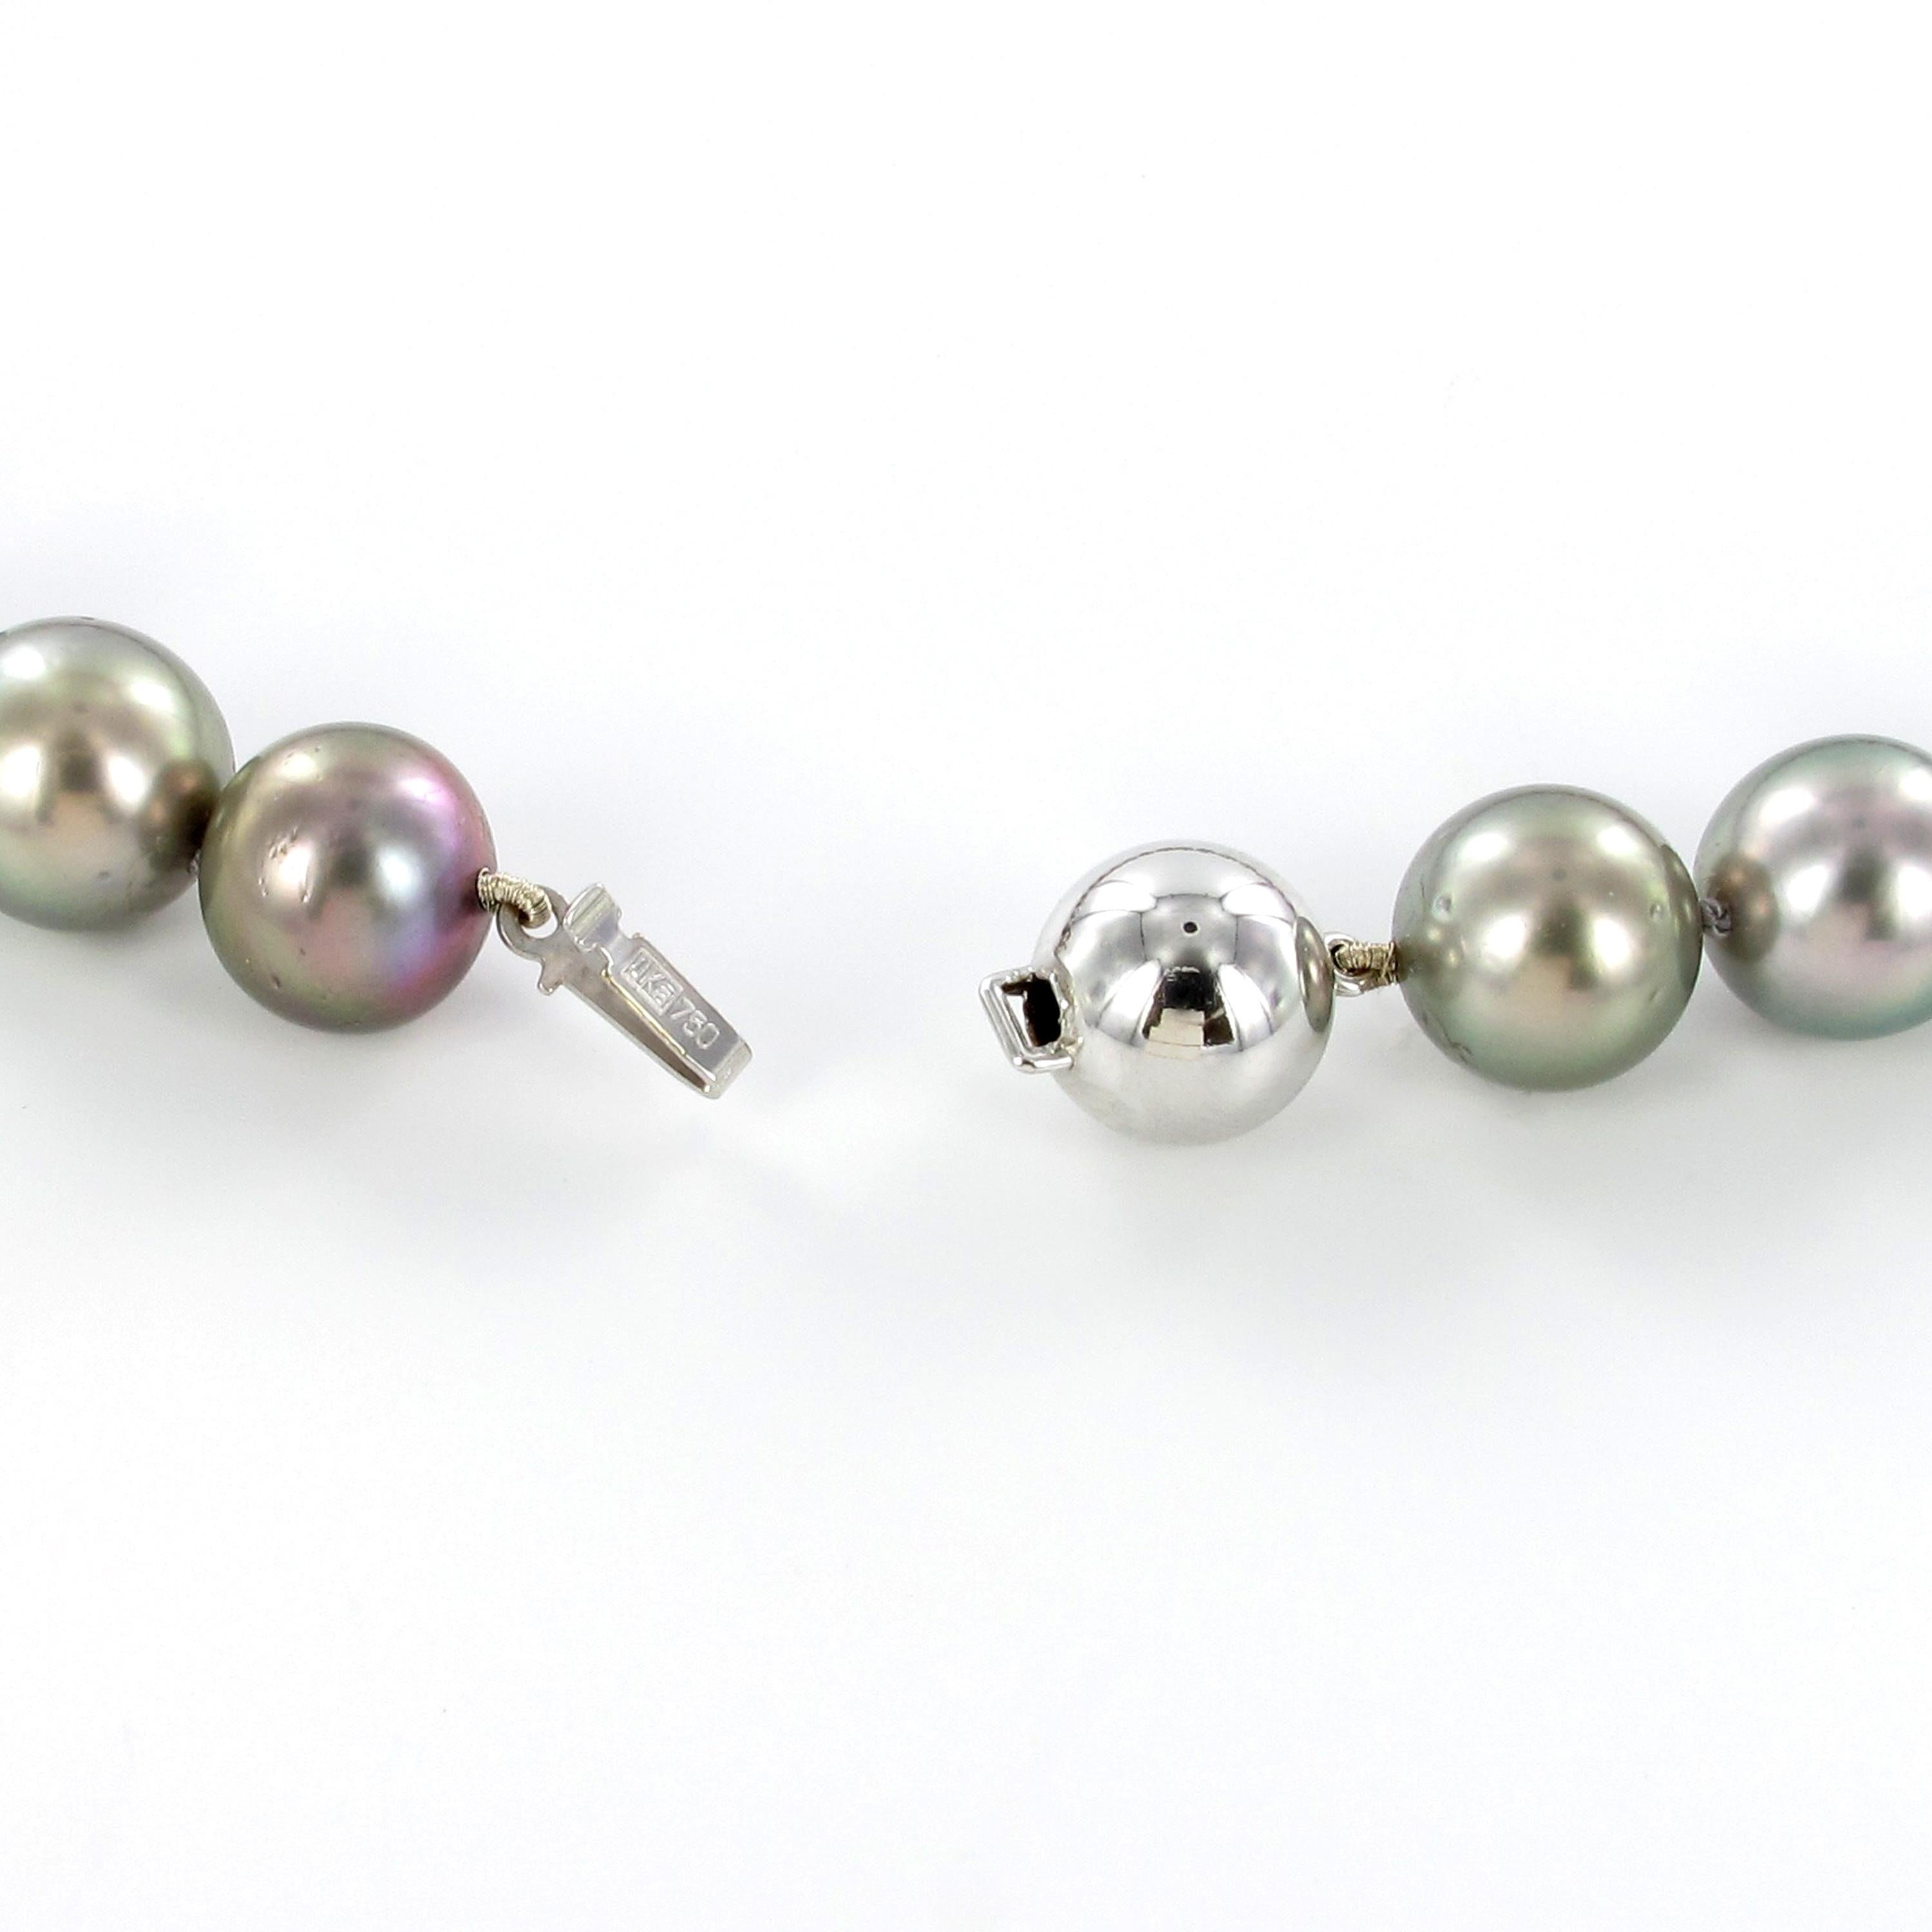 Tahitian Cultured Pearl Necklace with White Gold Ball Clasp In Excellent Condition For Sale In Lucerne, CH